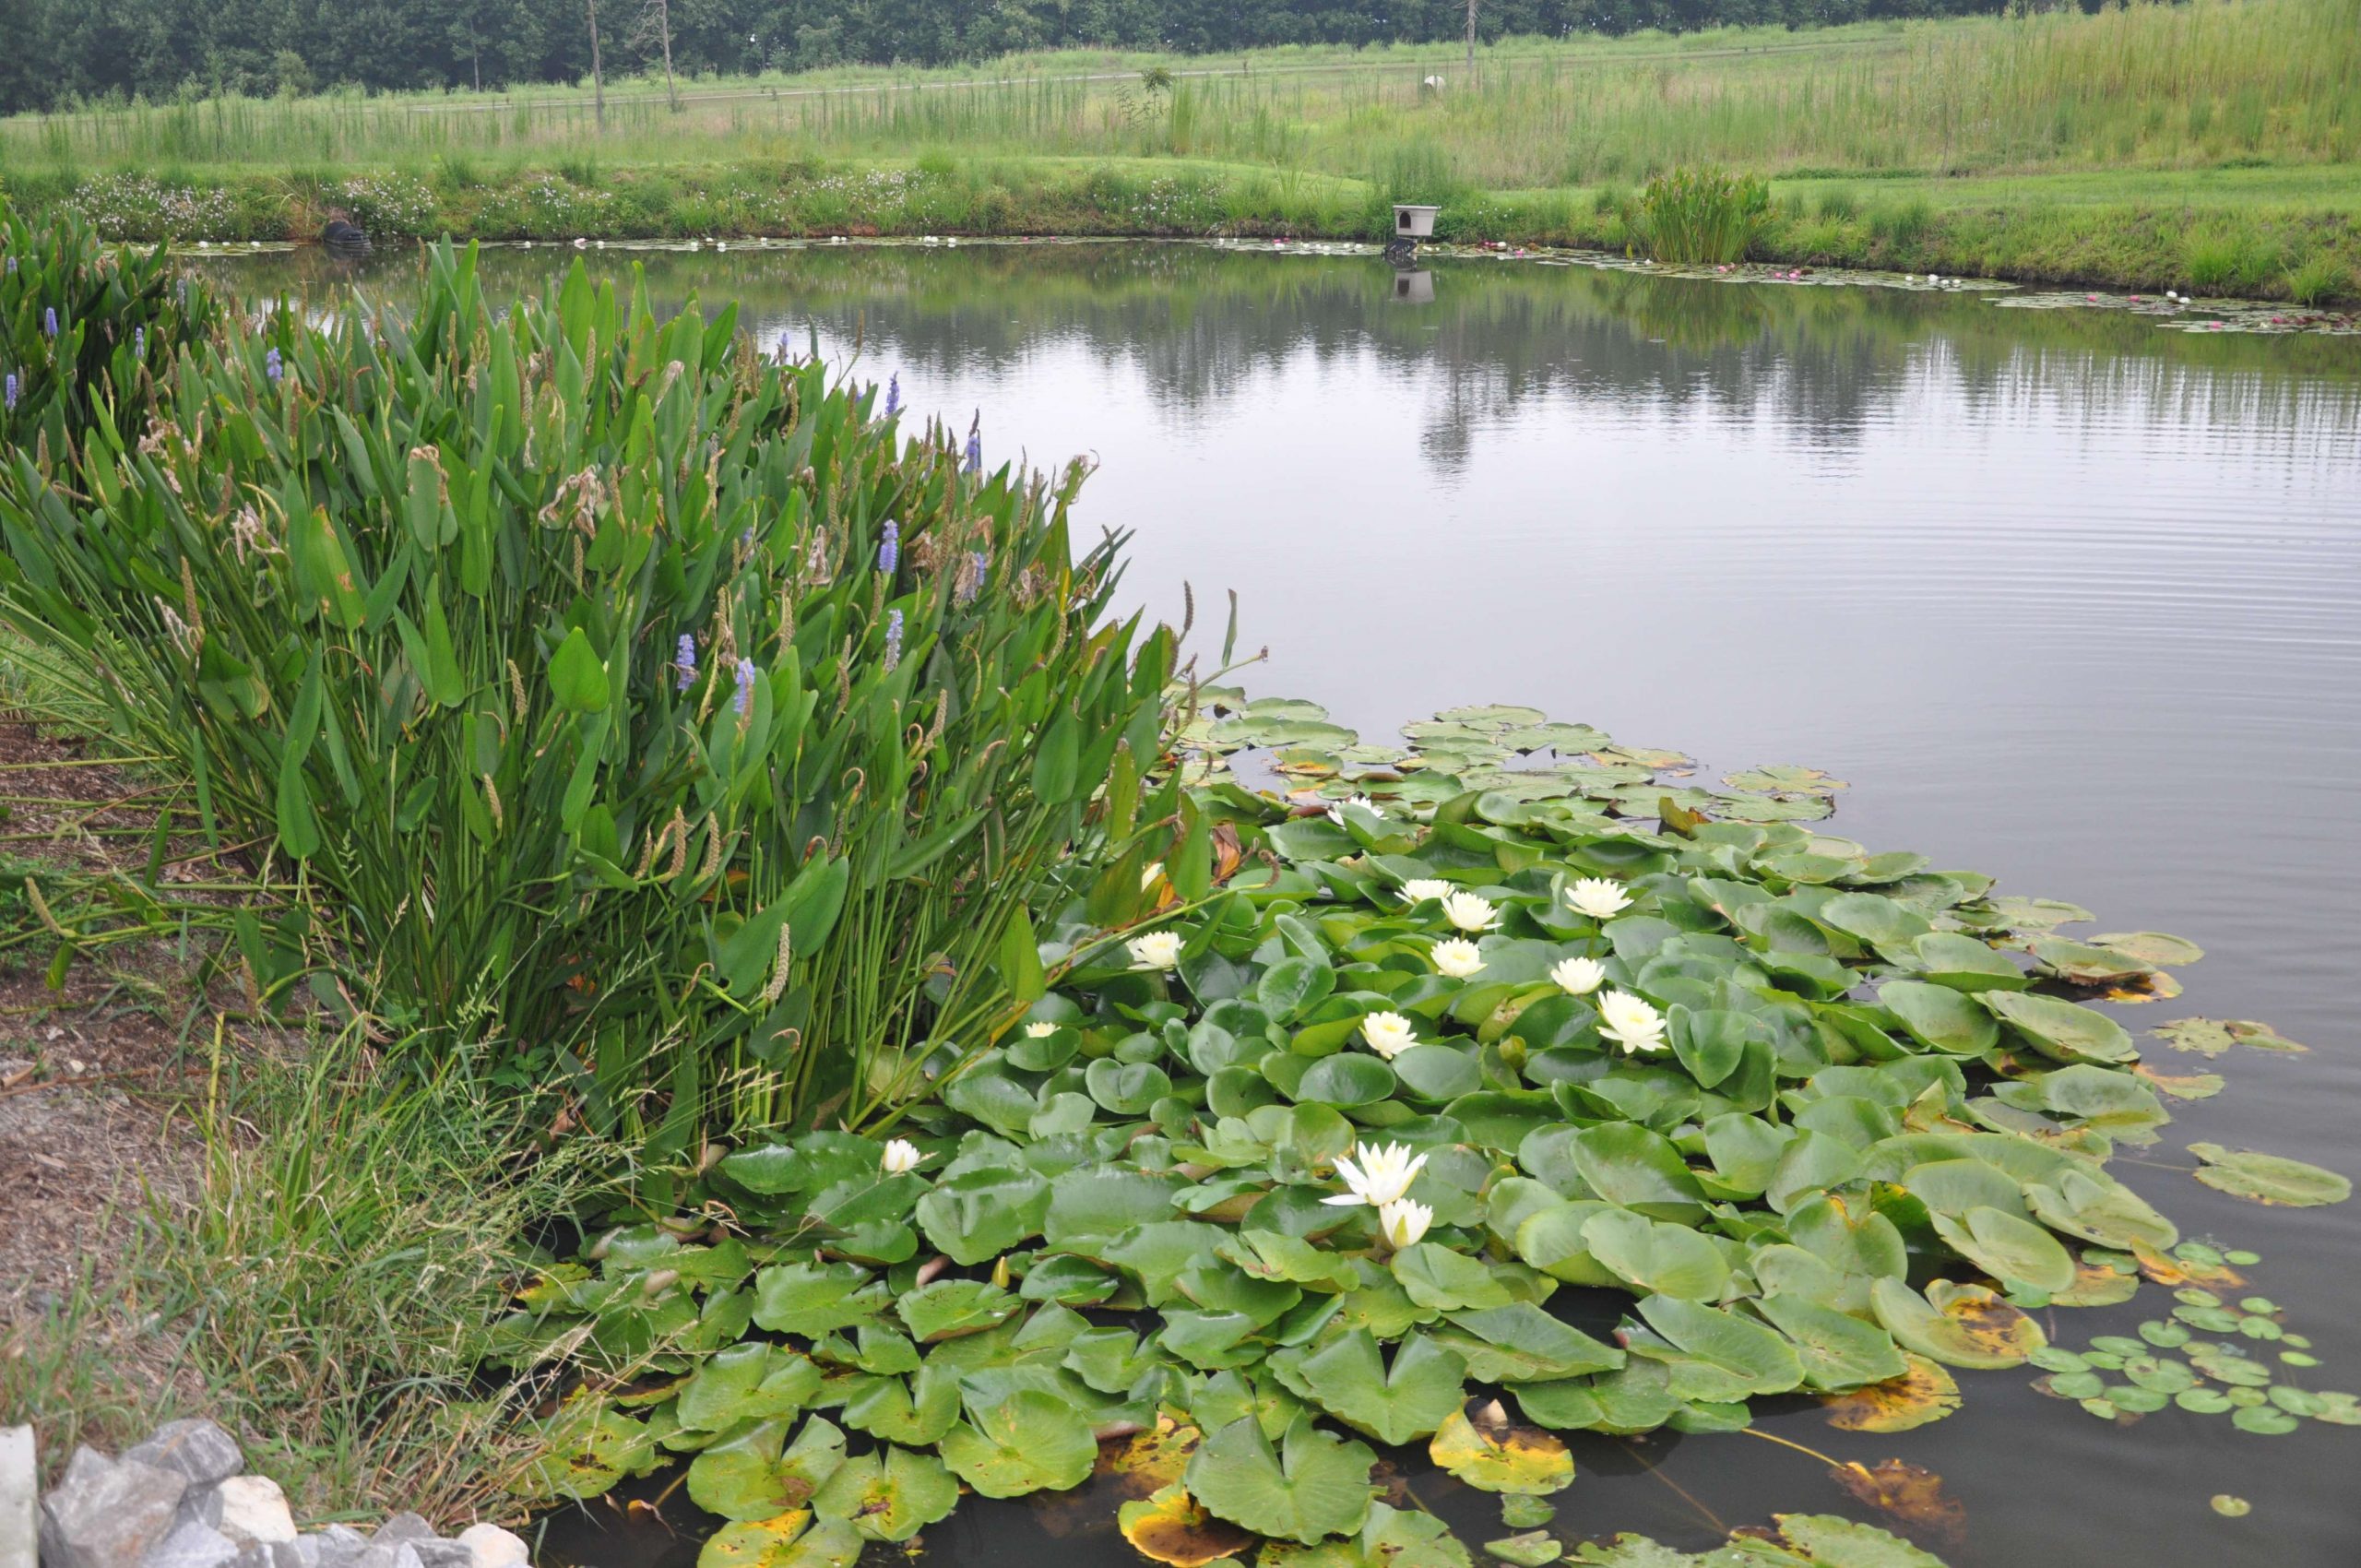 Native plants provide perfect habitat for bass without the need for costly management. Many actually provide better habitat than their invasive counterparts because they donât produce nearly as much matting and allow for bass and prey species to work through them rather than around them.